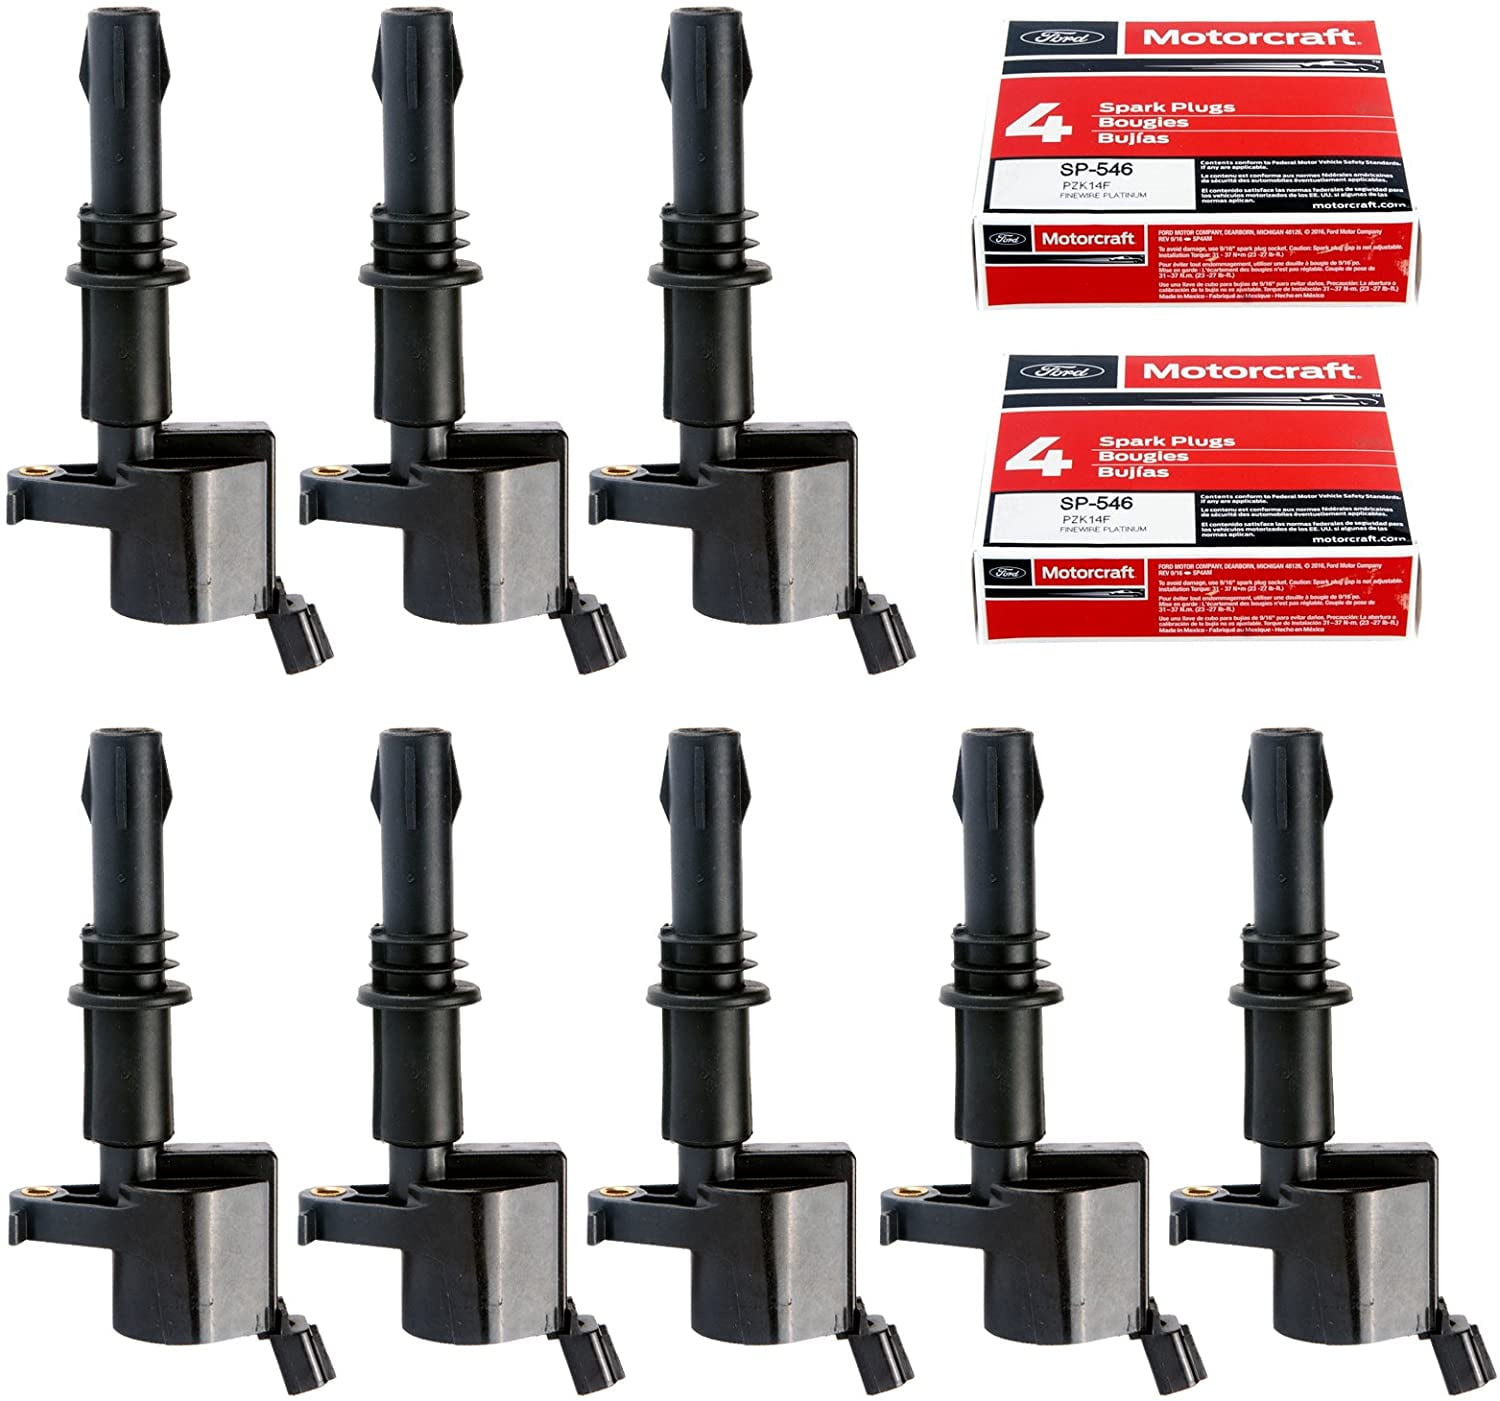 Delphi Ignition Coils For Ford F-150 New Bosch 4304 Spark Plugs + 8 8 